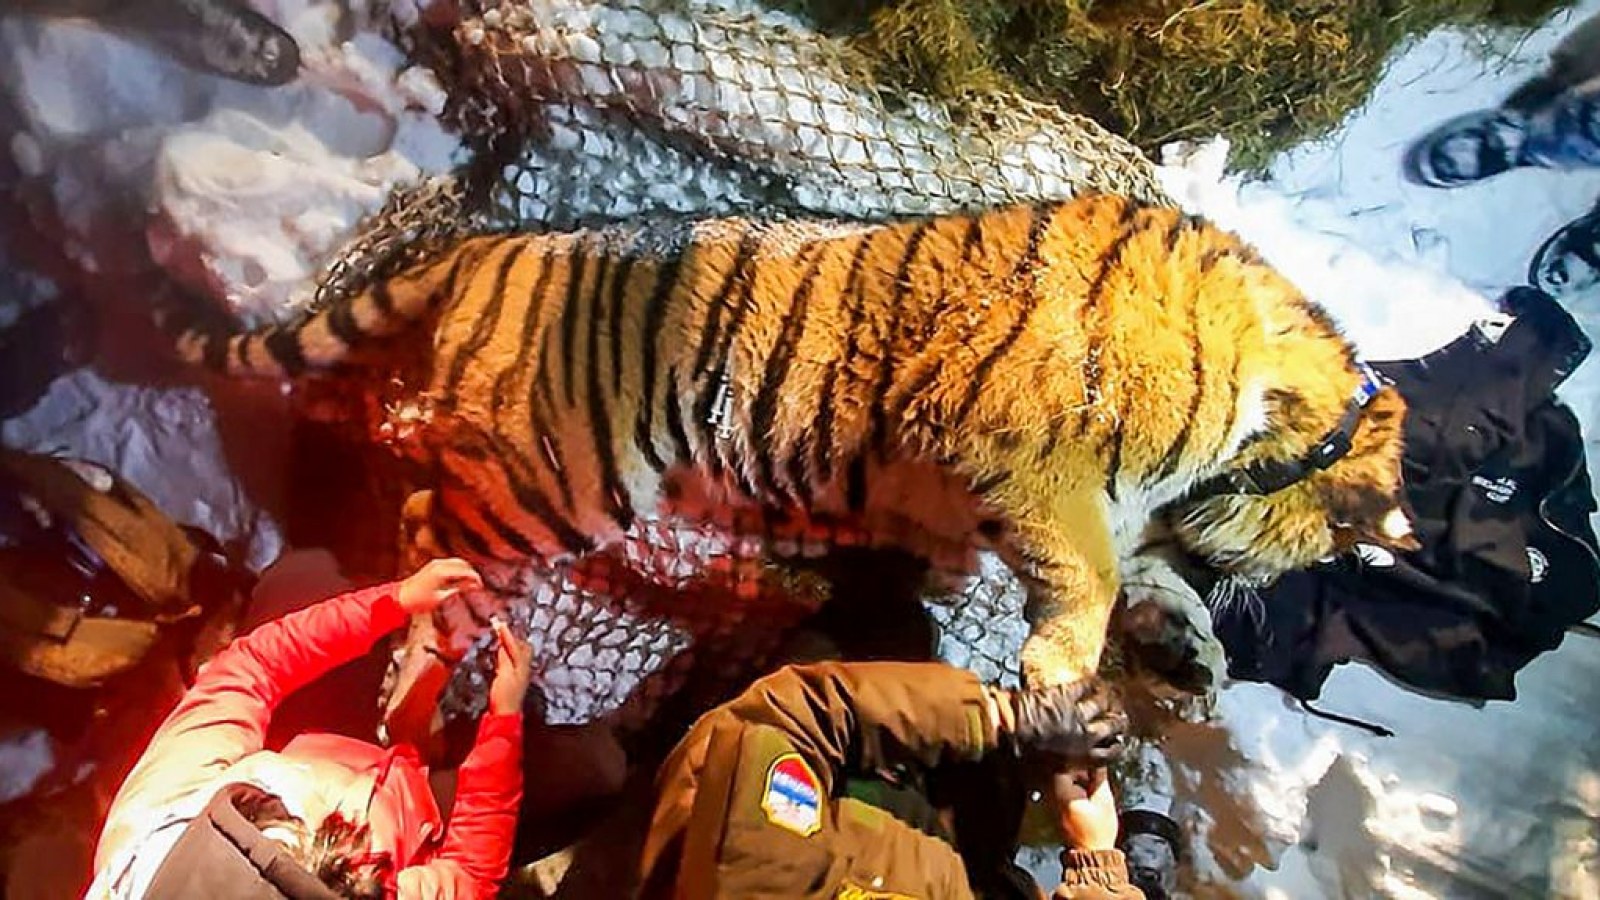 Tiger Who Ate Seven Pets in Local Village Released Back Into the Wild